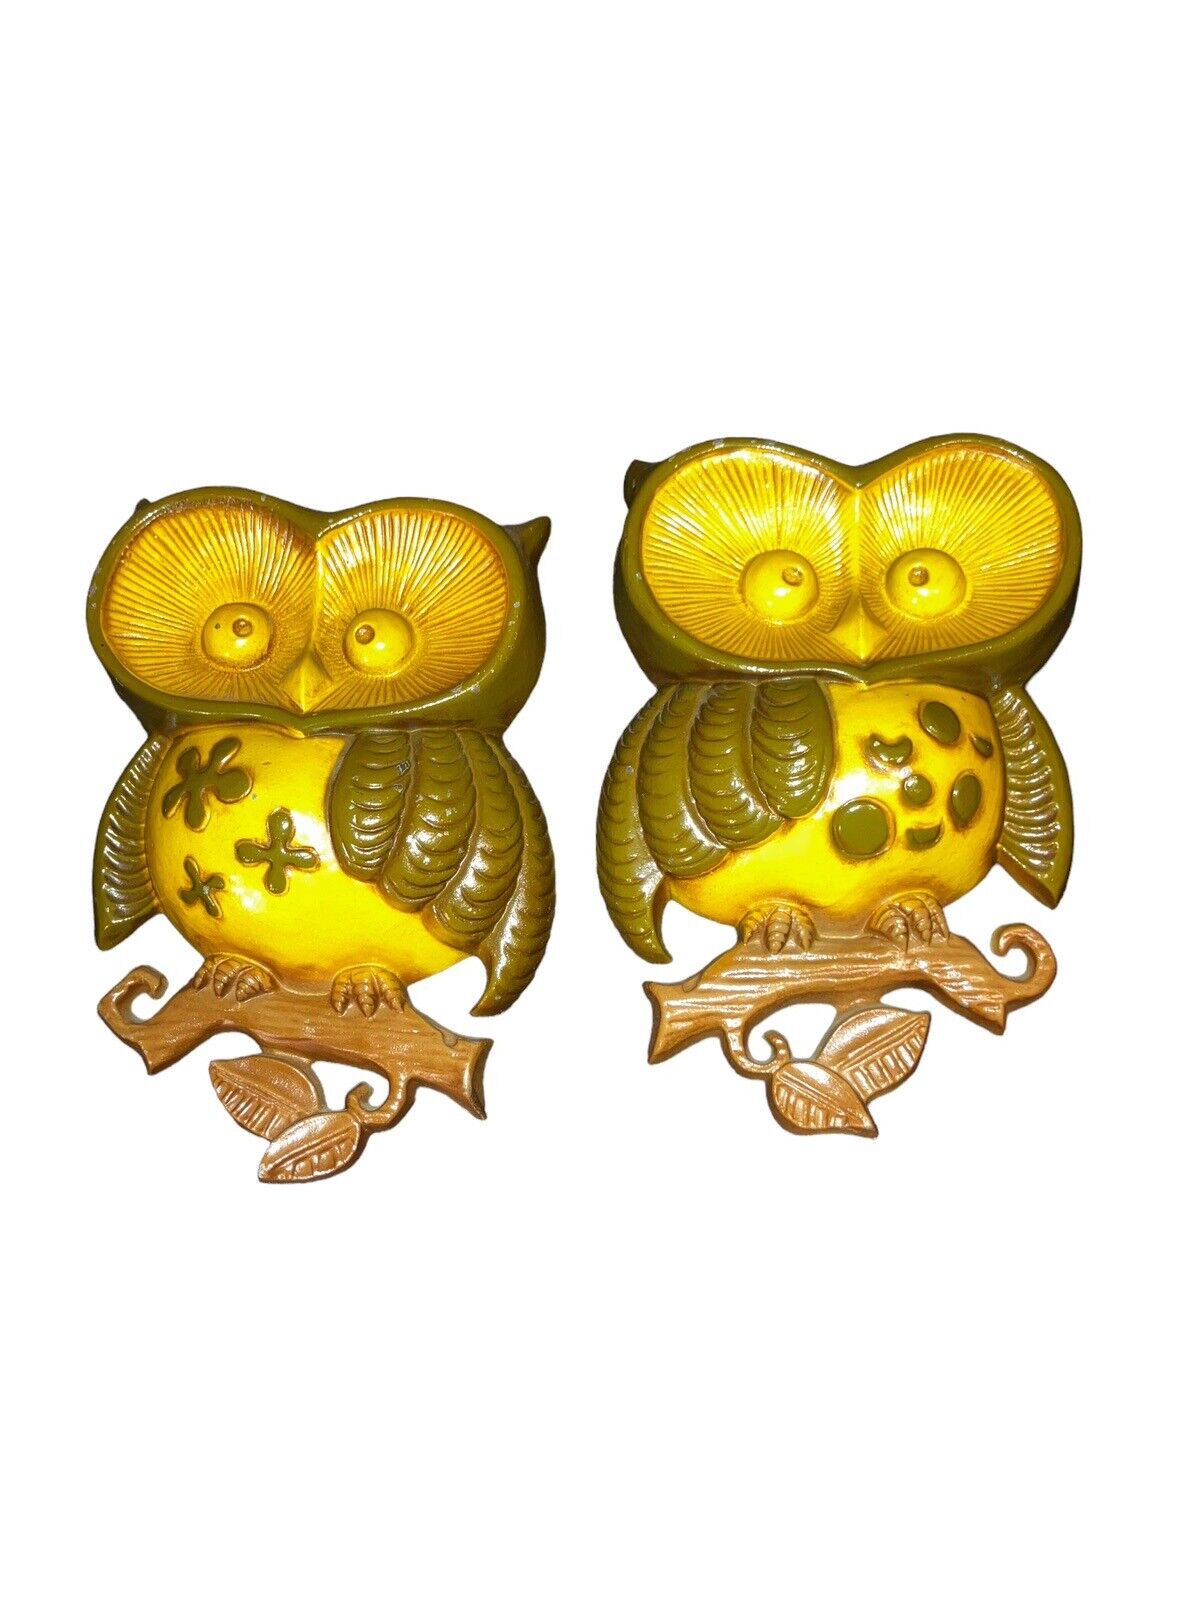 Vintage Cast Metal Pair Of Owls, Wall Hanging, Sexton USA